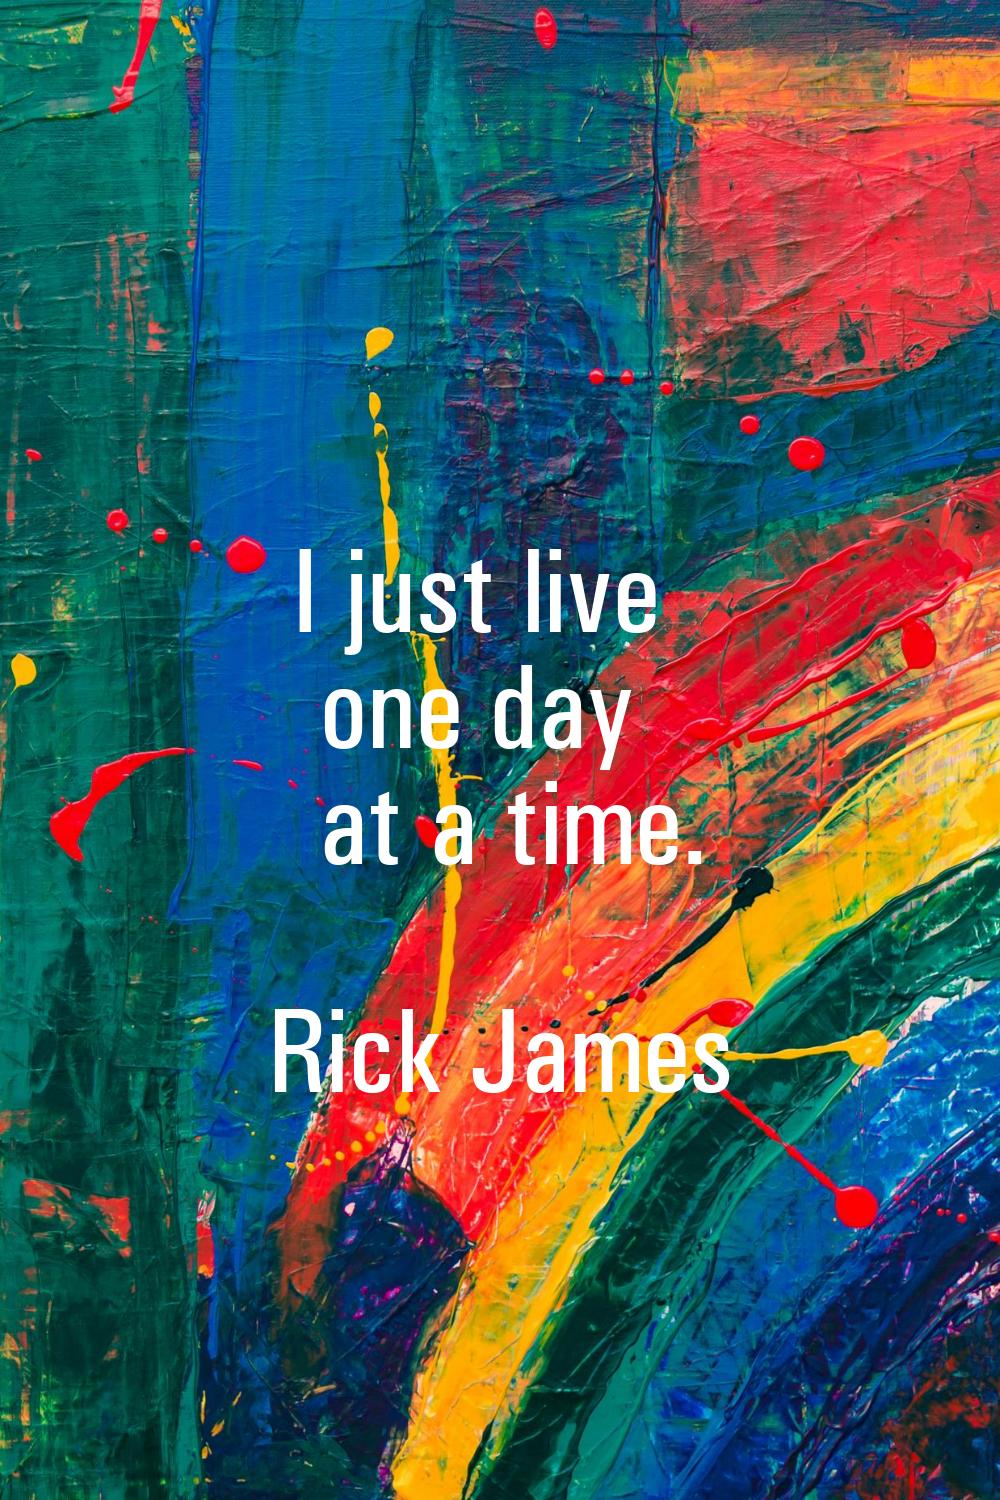 I just live one day at a time.